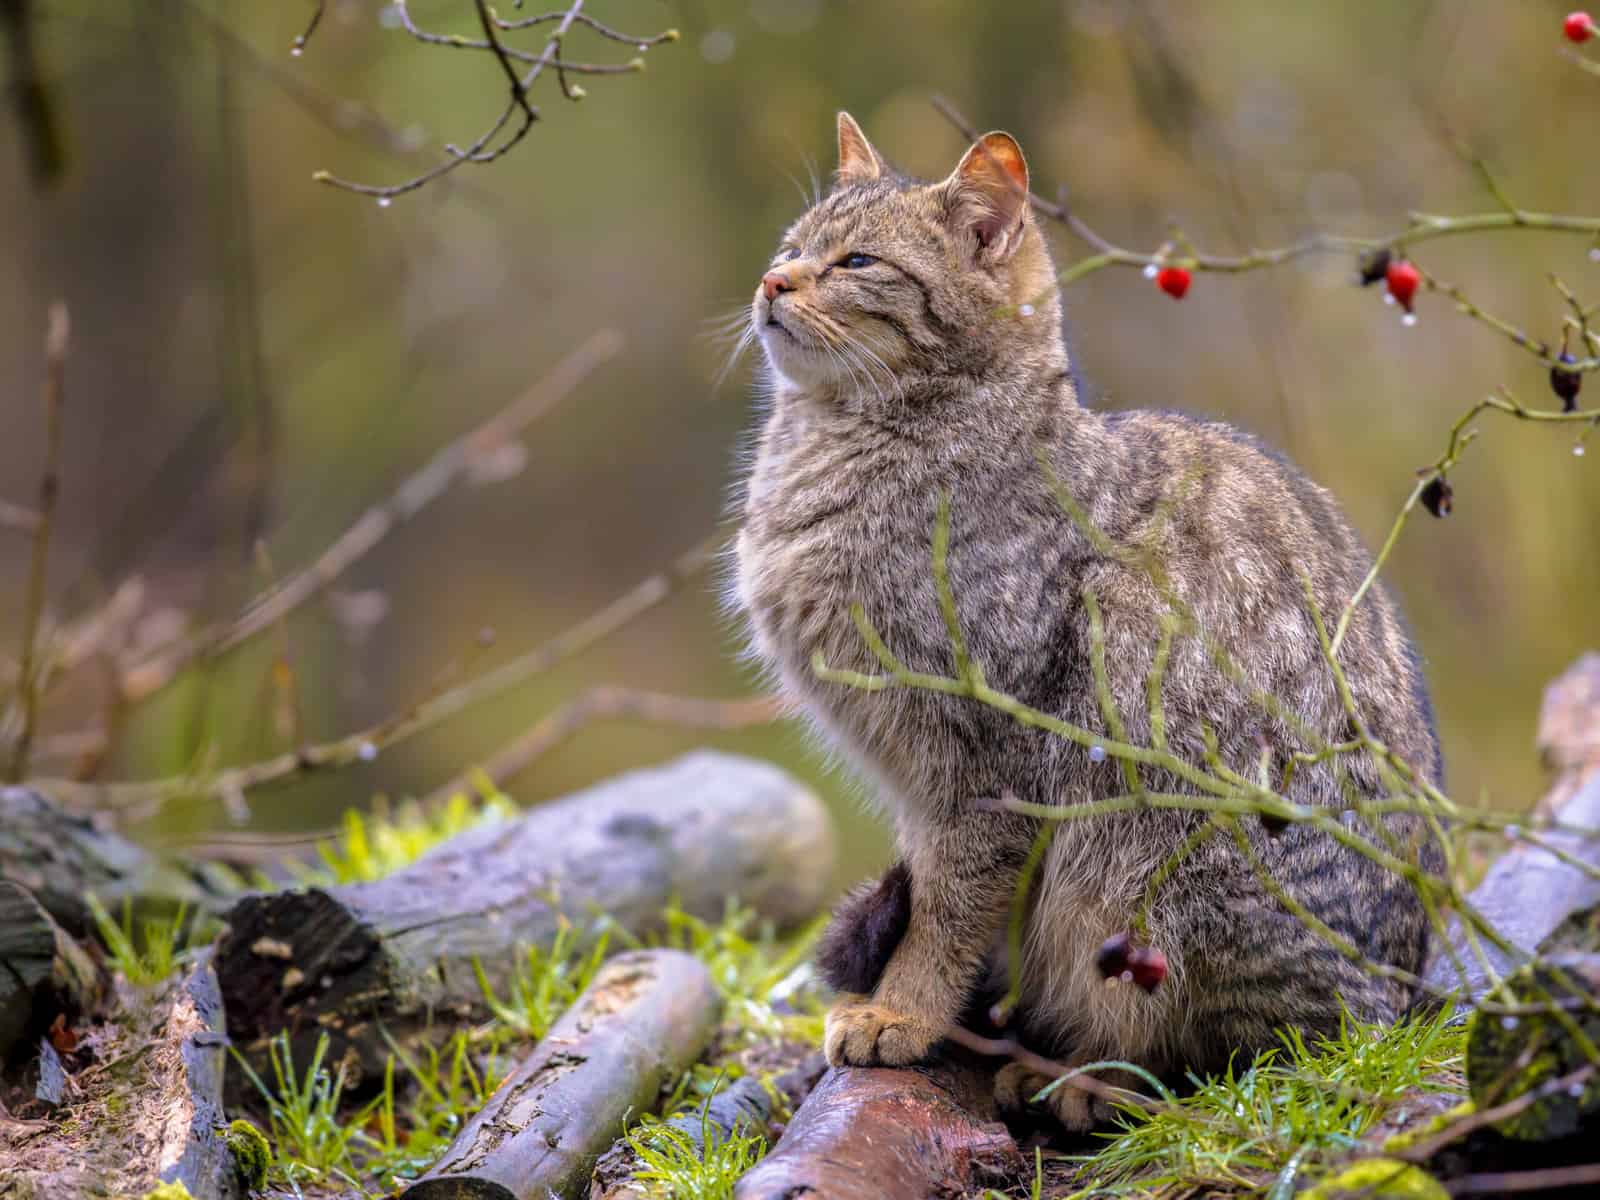 European wild cat  (Felis silvestris) looking sweet in the forest from the bushes on a rainy day